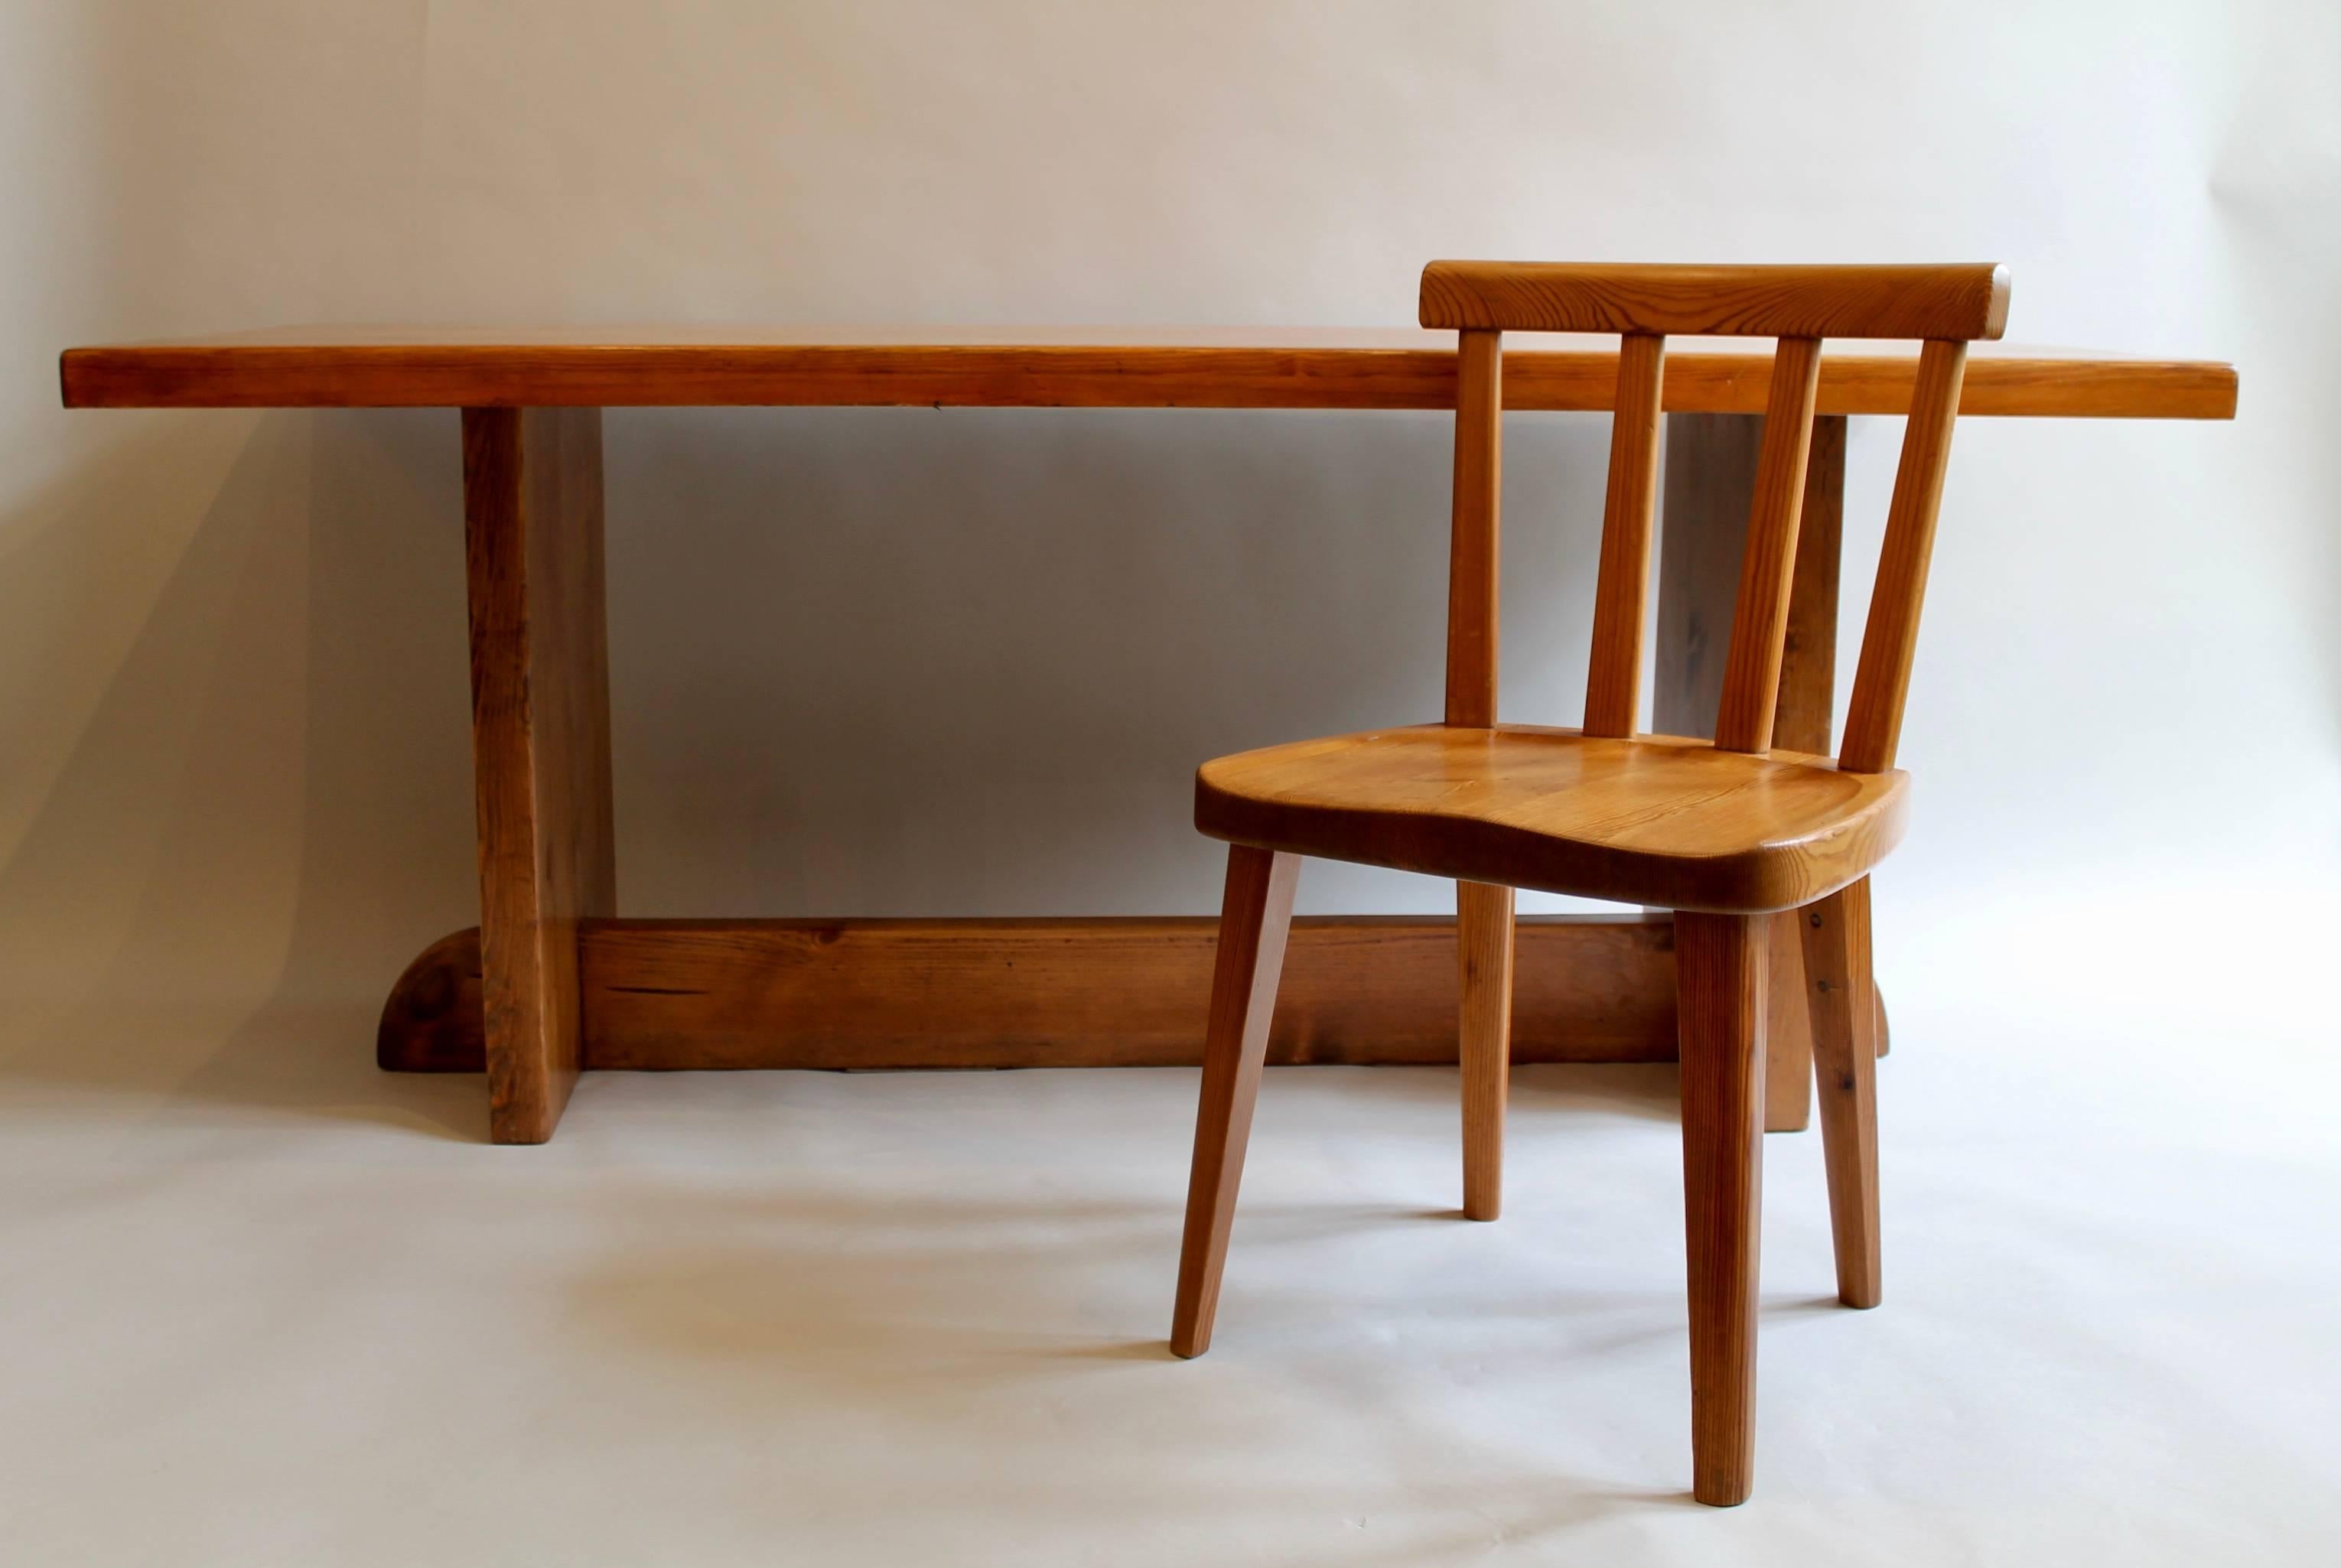 Scandinavian Modern Pine Dining Table with Six Matching Chairs by Axel Einar Hjorth